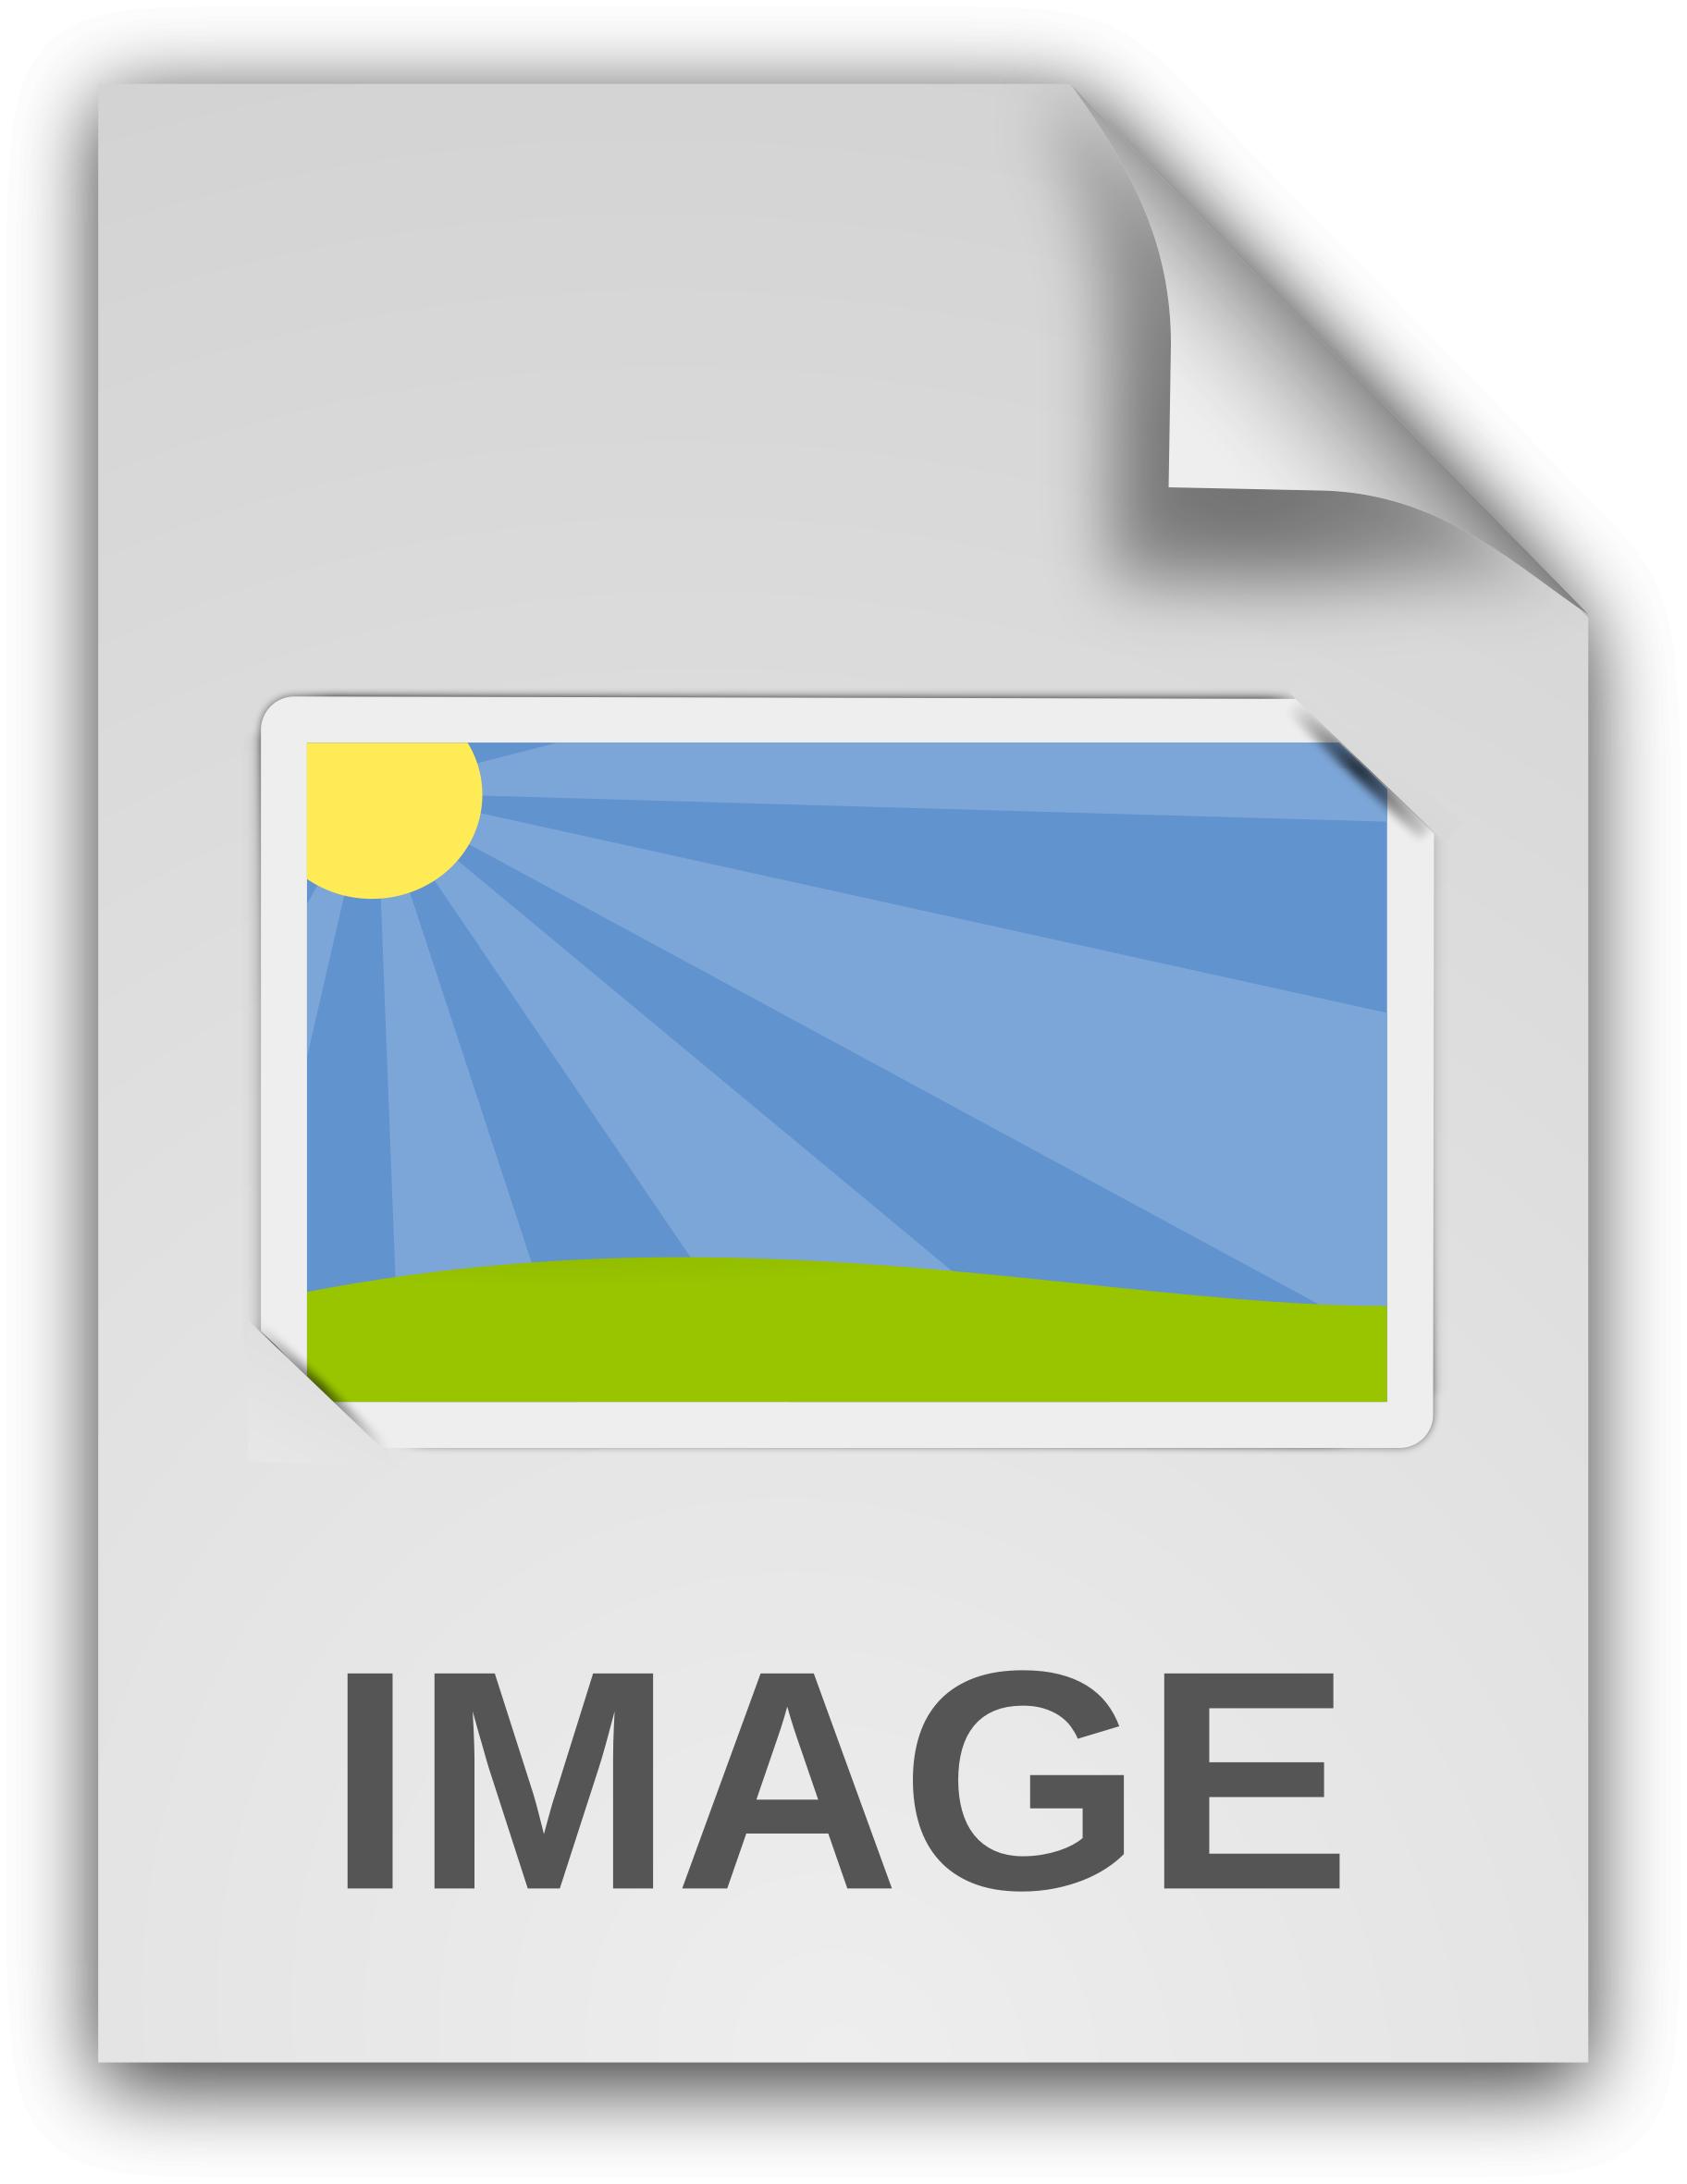 Image Document Icon png